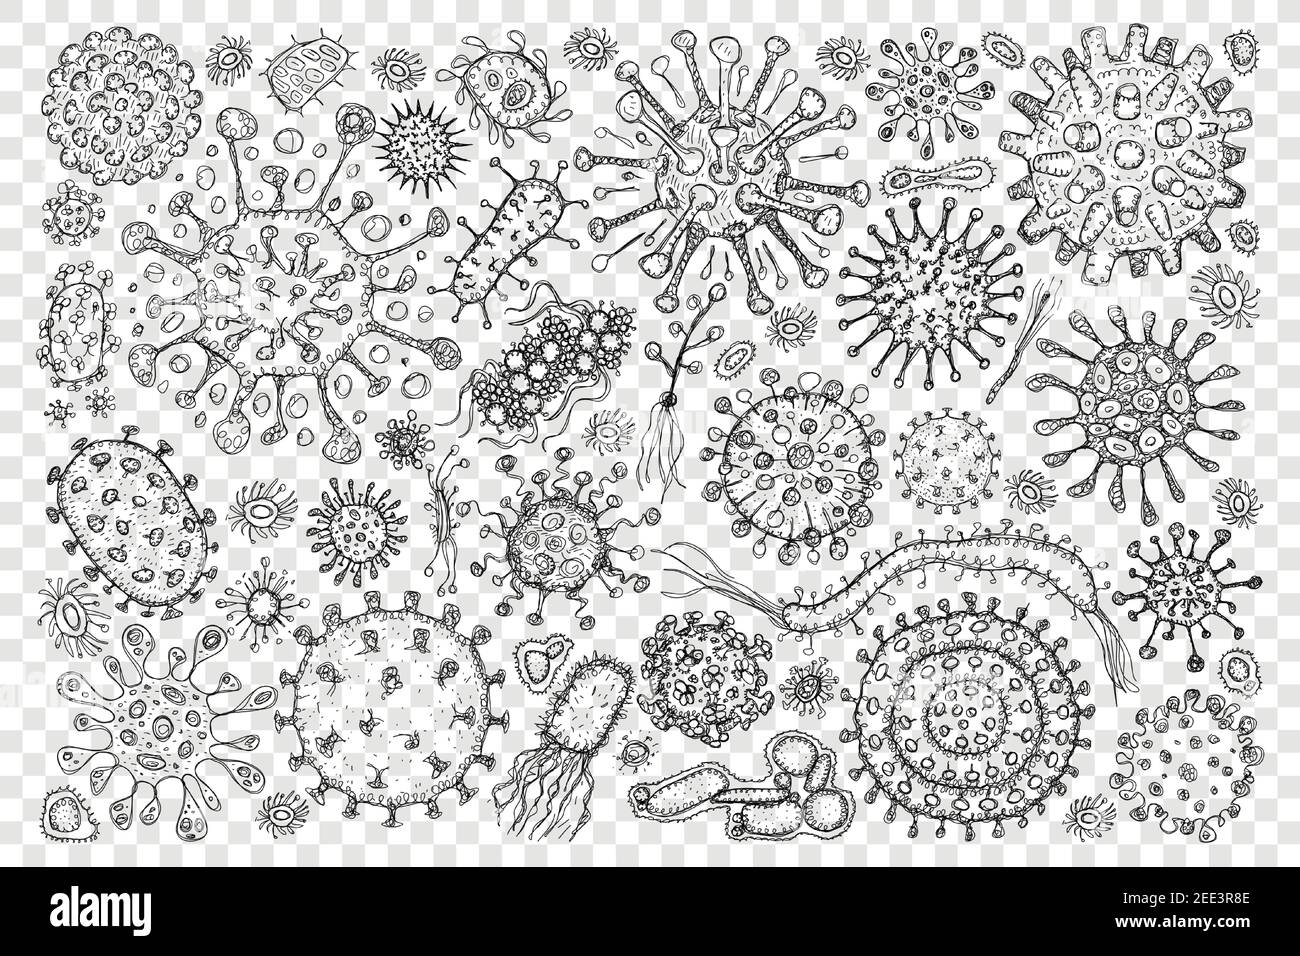 Bacteria virus molecule doodle set. Collection of hand drawn various microbe bacteria molecules of different shapes and sizes in microbiology isolated on transparent background Stock Vector